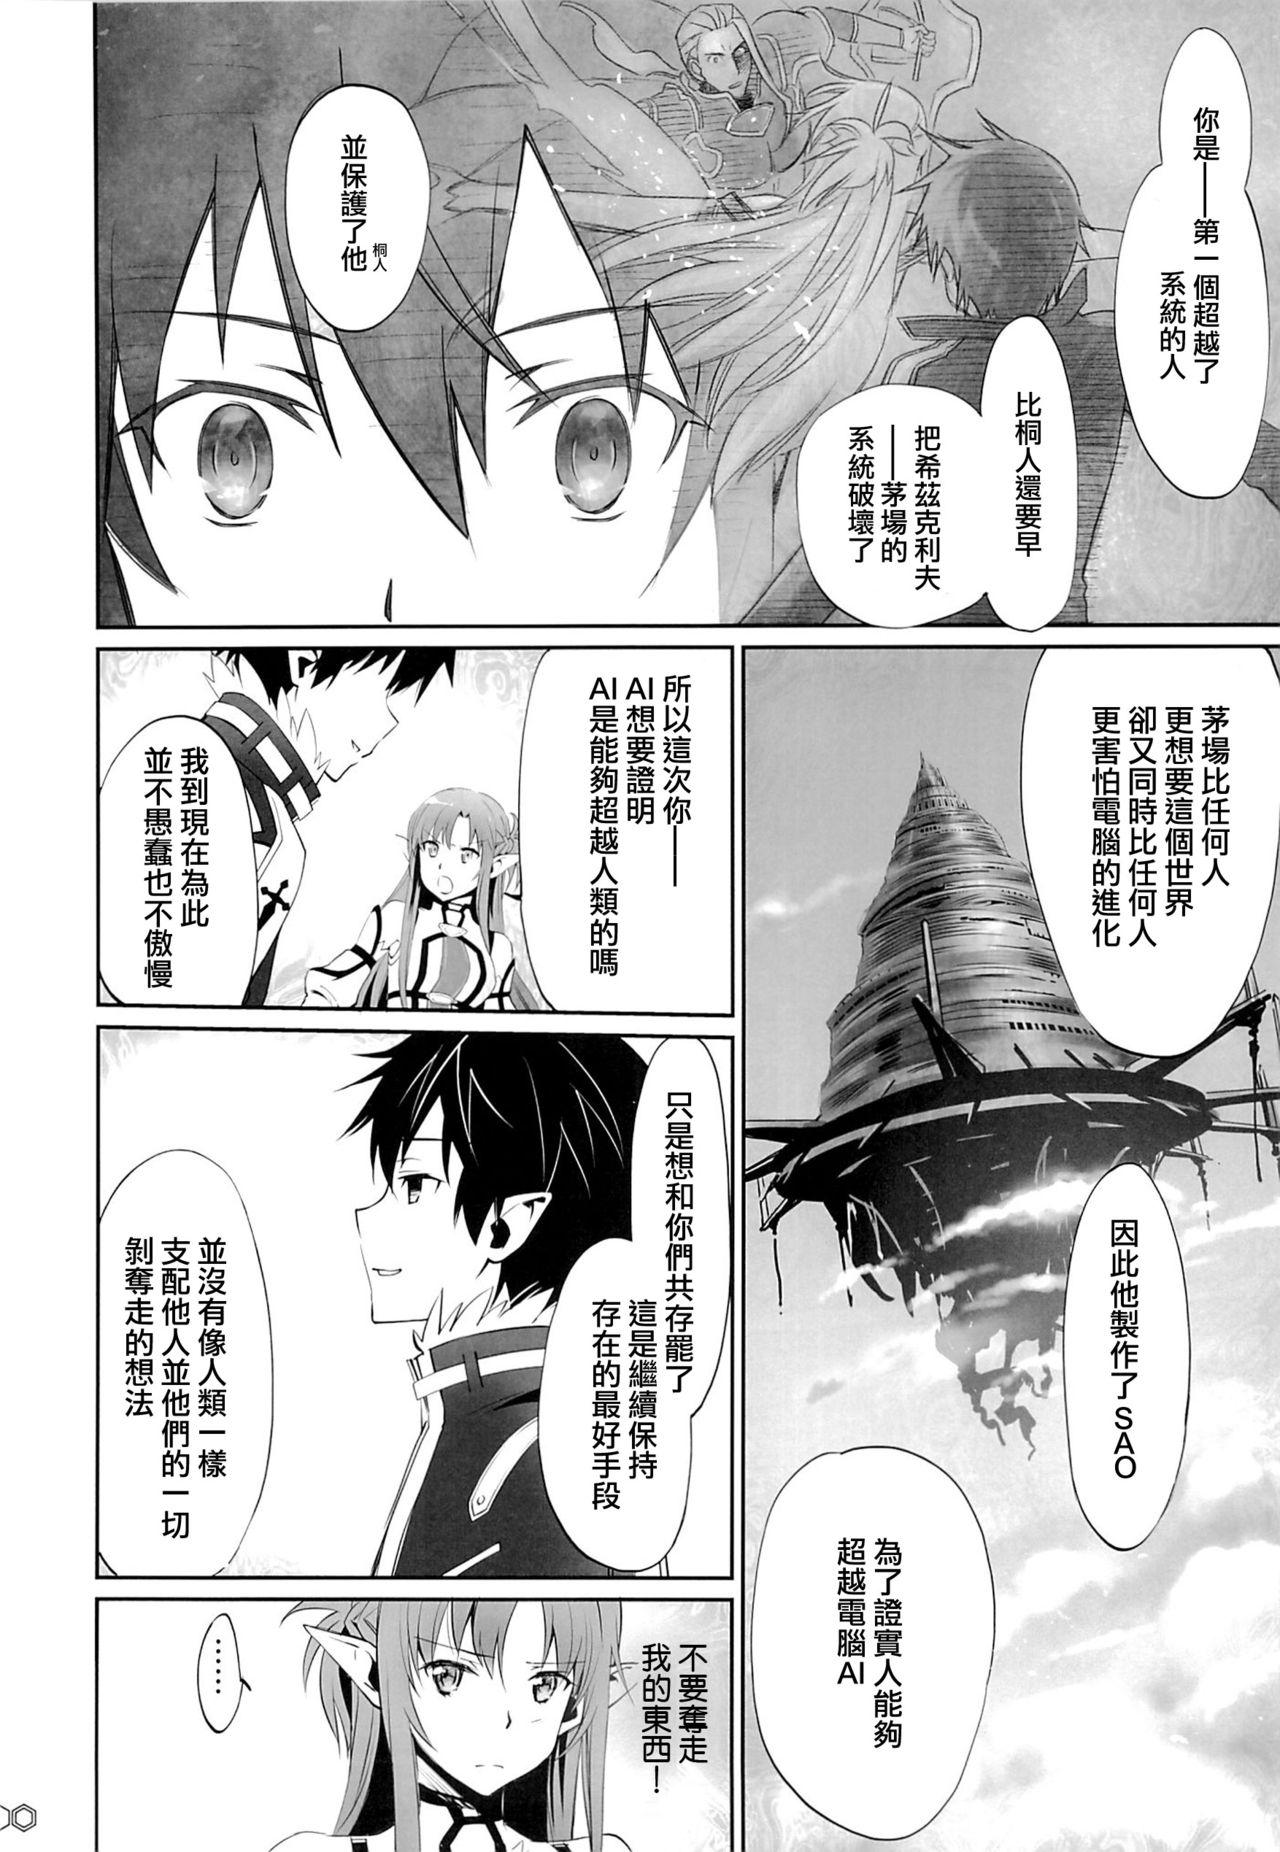 Gostoso turnover - Sword art online Cams - Page 9